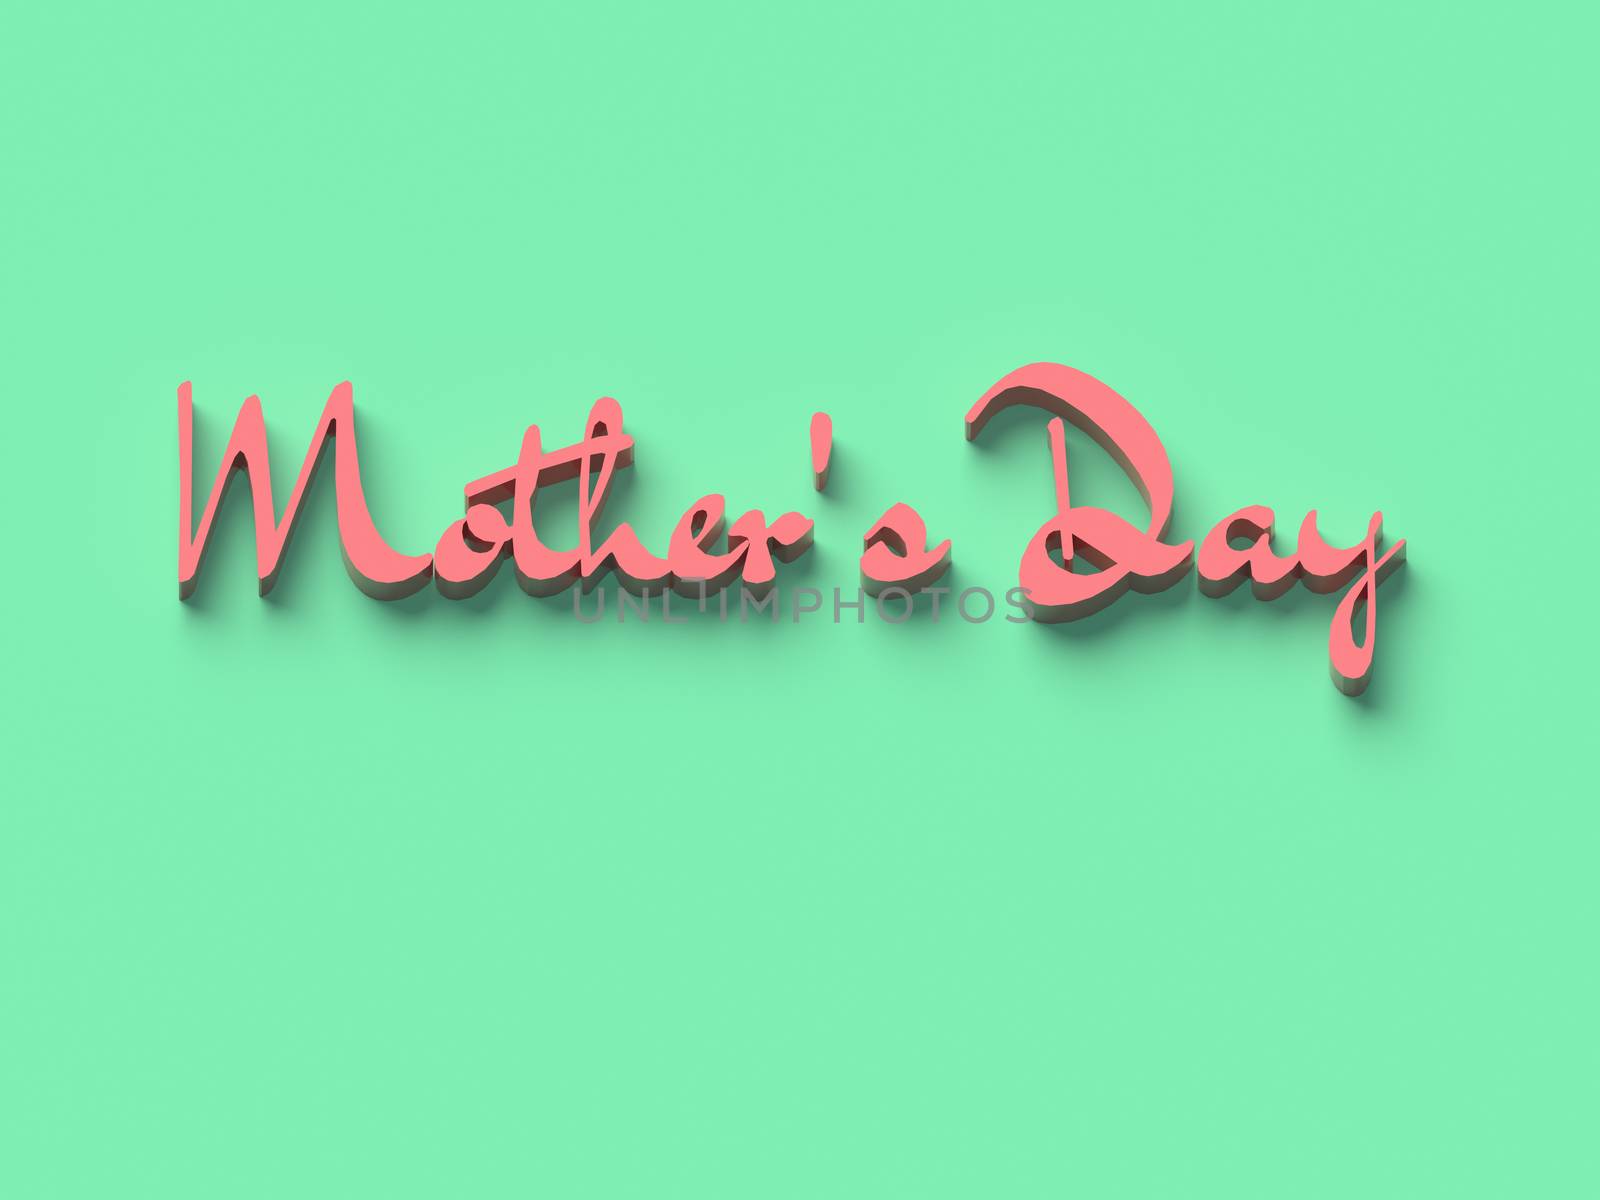 3D WORDS 'MOTHER'S DAY' ON PLAIN BACKGROUND by PrettyTG